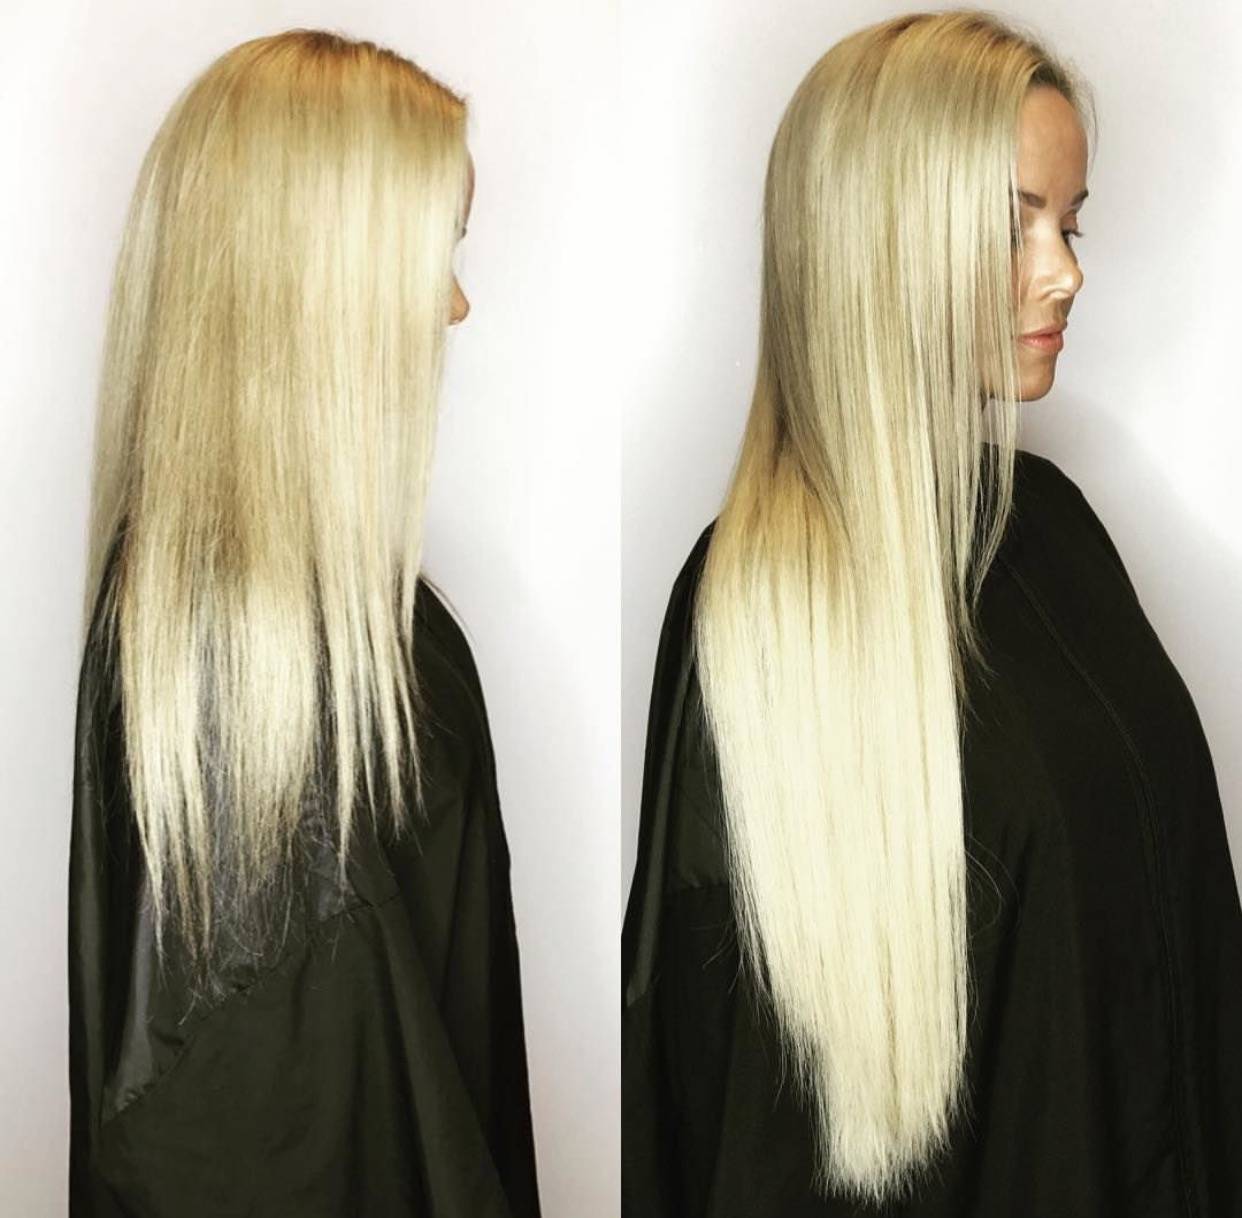 Learn How to Choose The Right Hair Extensions